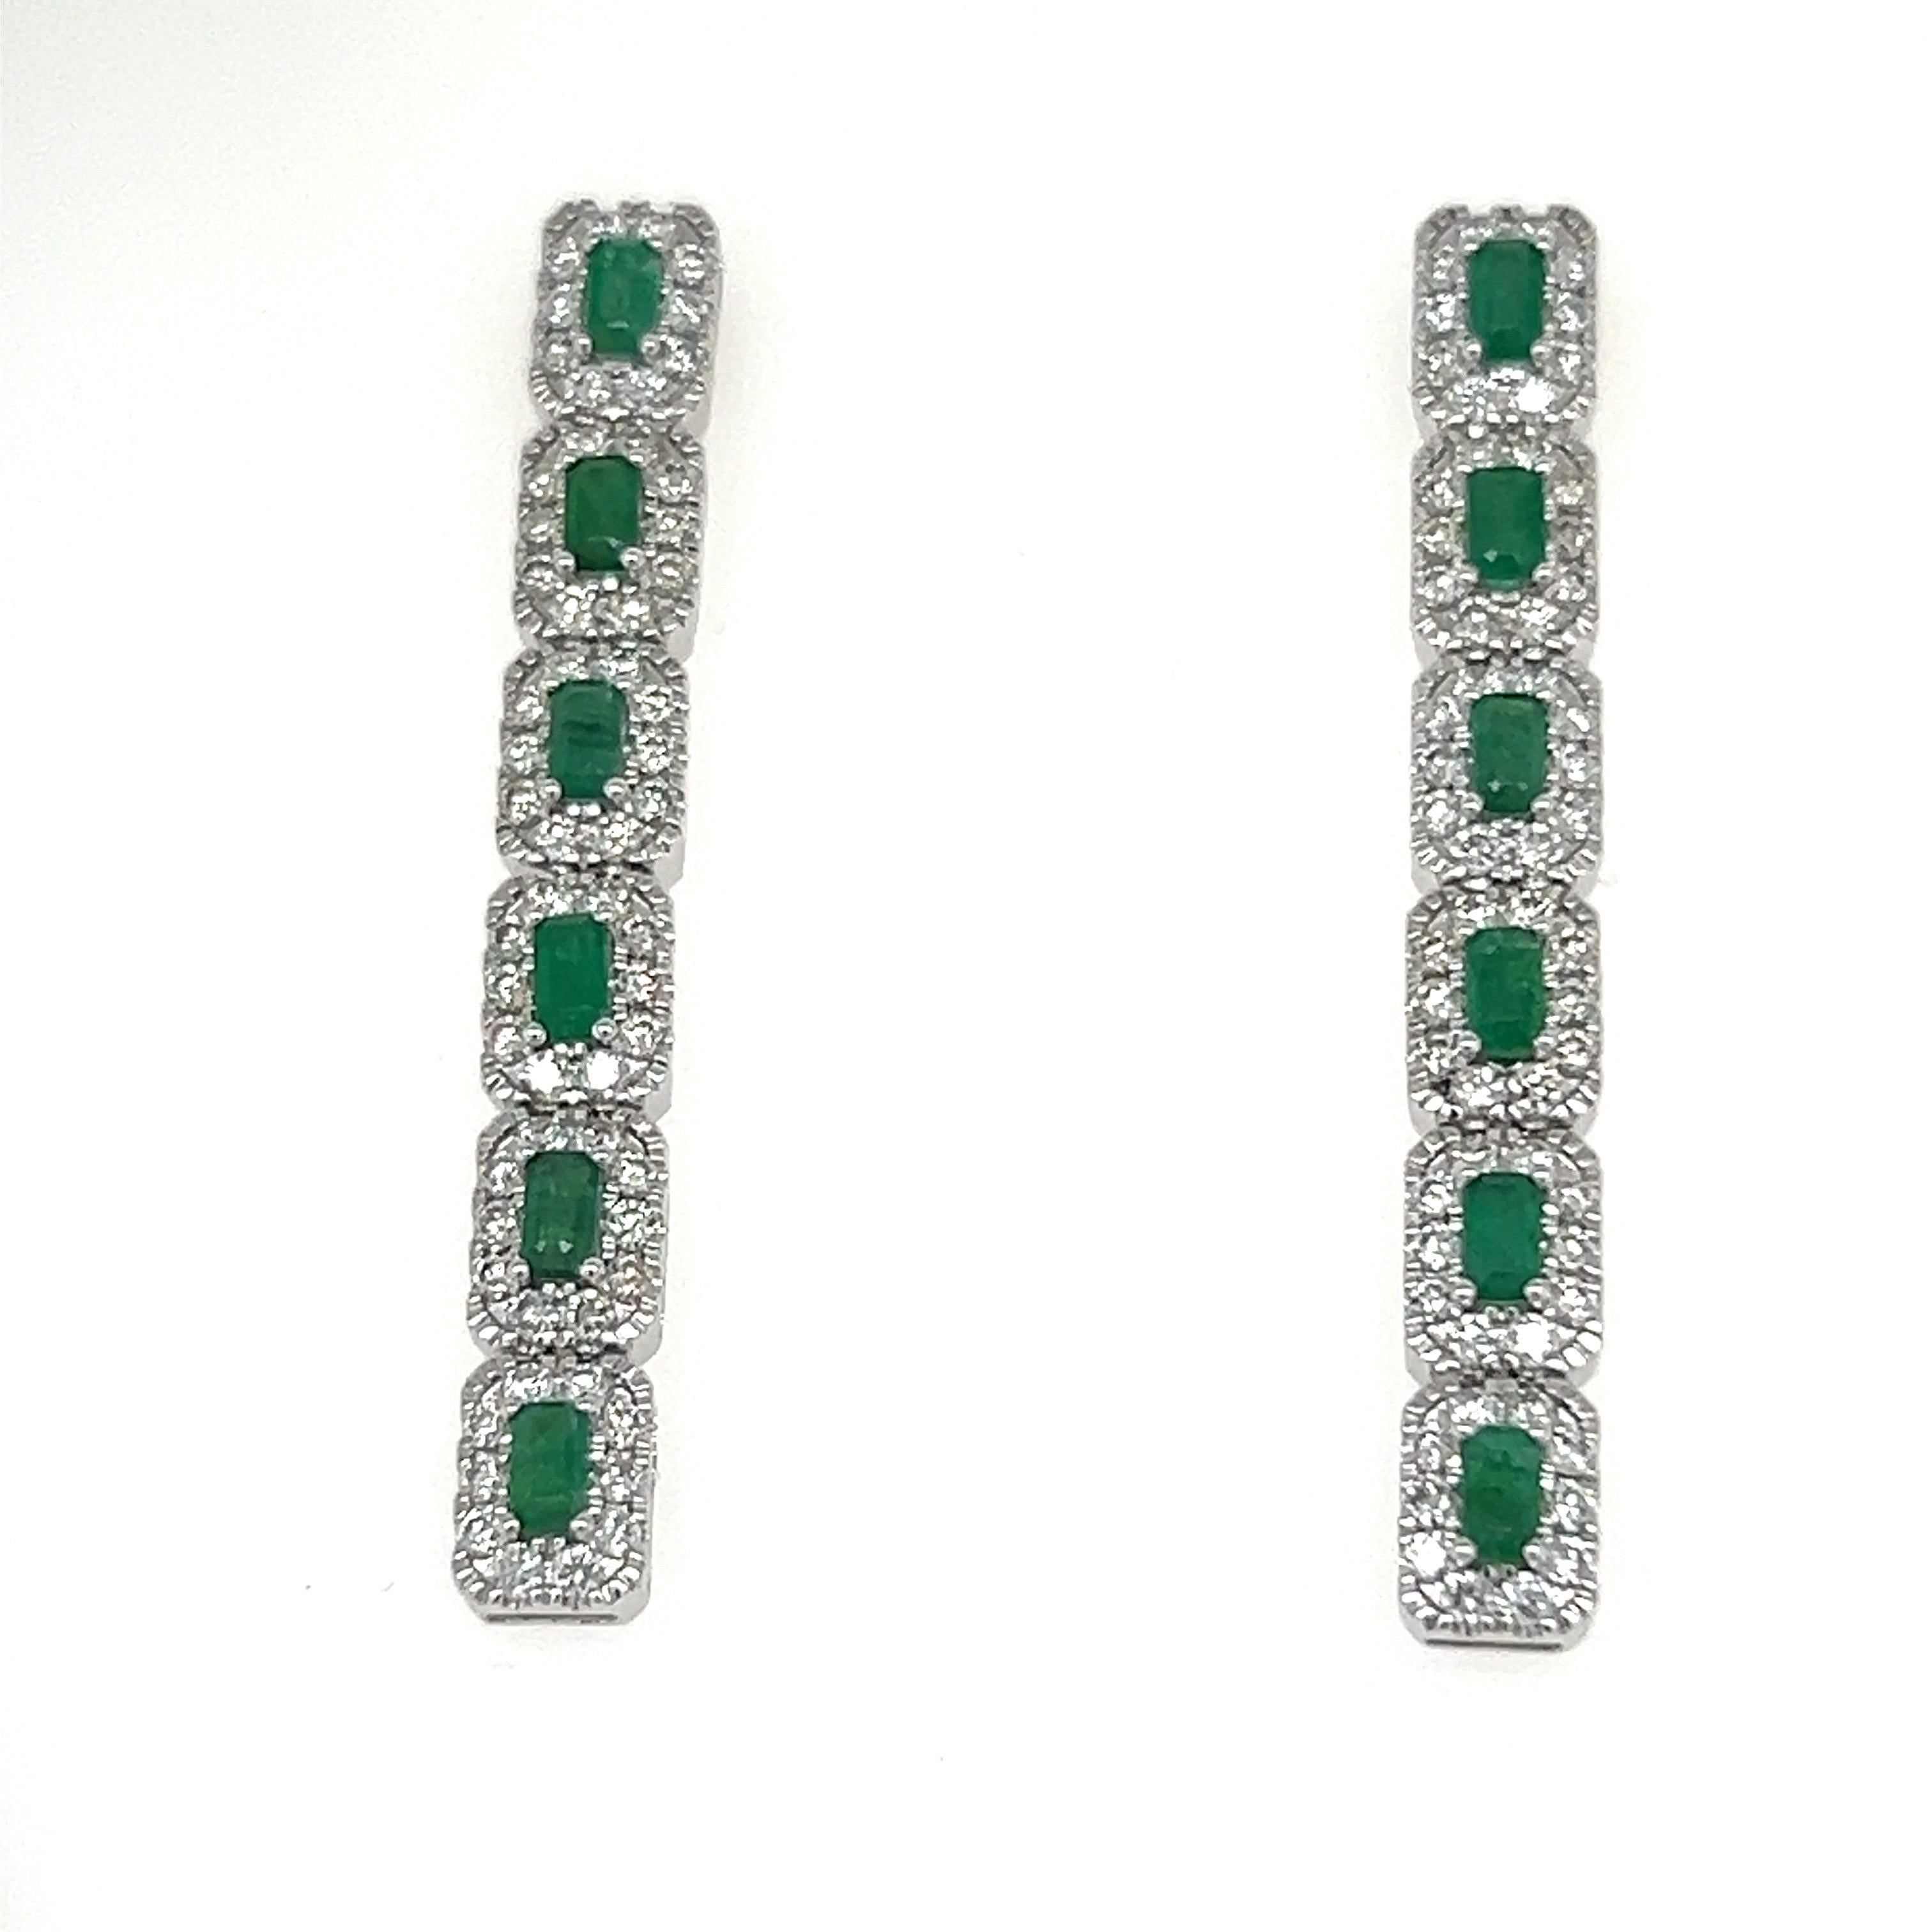 Contemporary 5.80 Carat Emerald Necklace Earrings Set For Sale